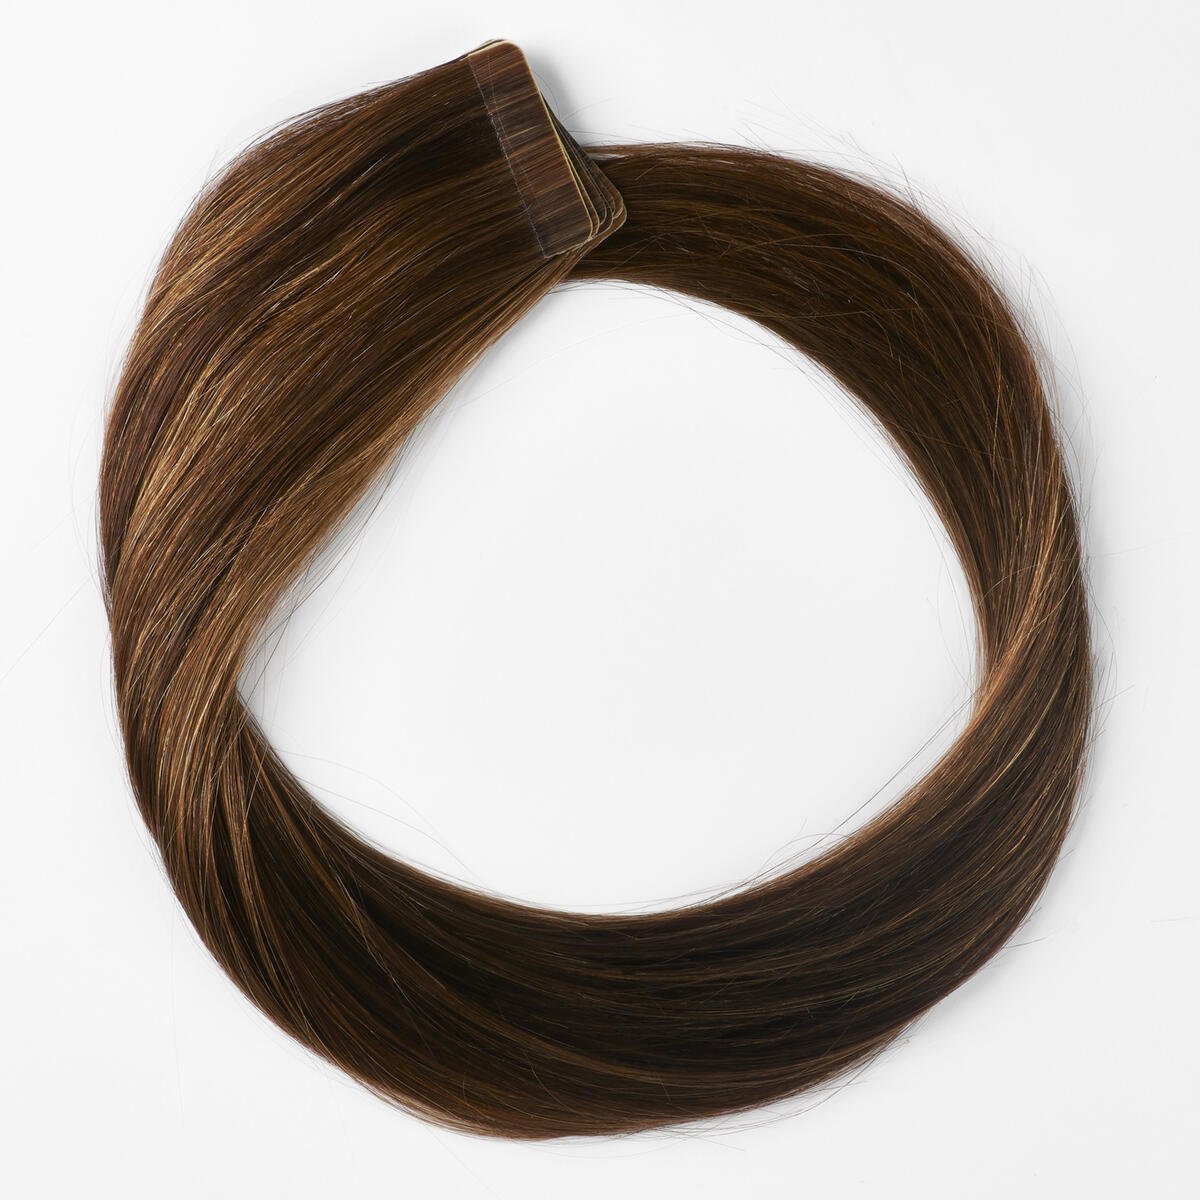 Basic Tape Extensions Classic 4 M2.3/5.0 Chocolate Mix 50 cm